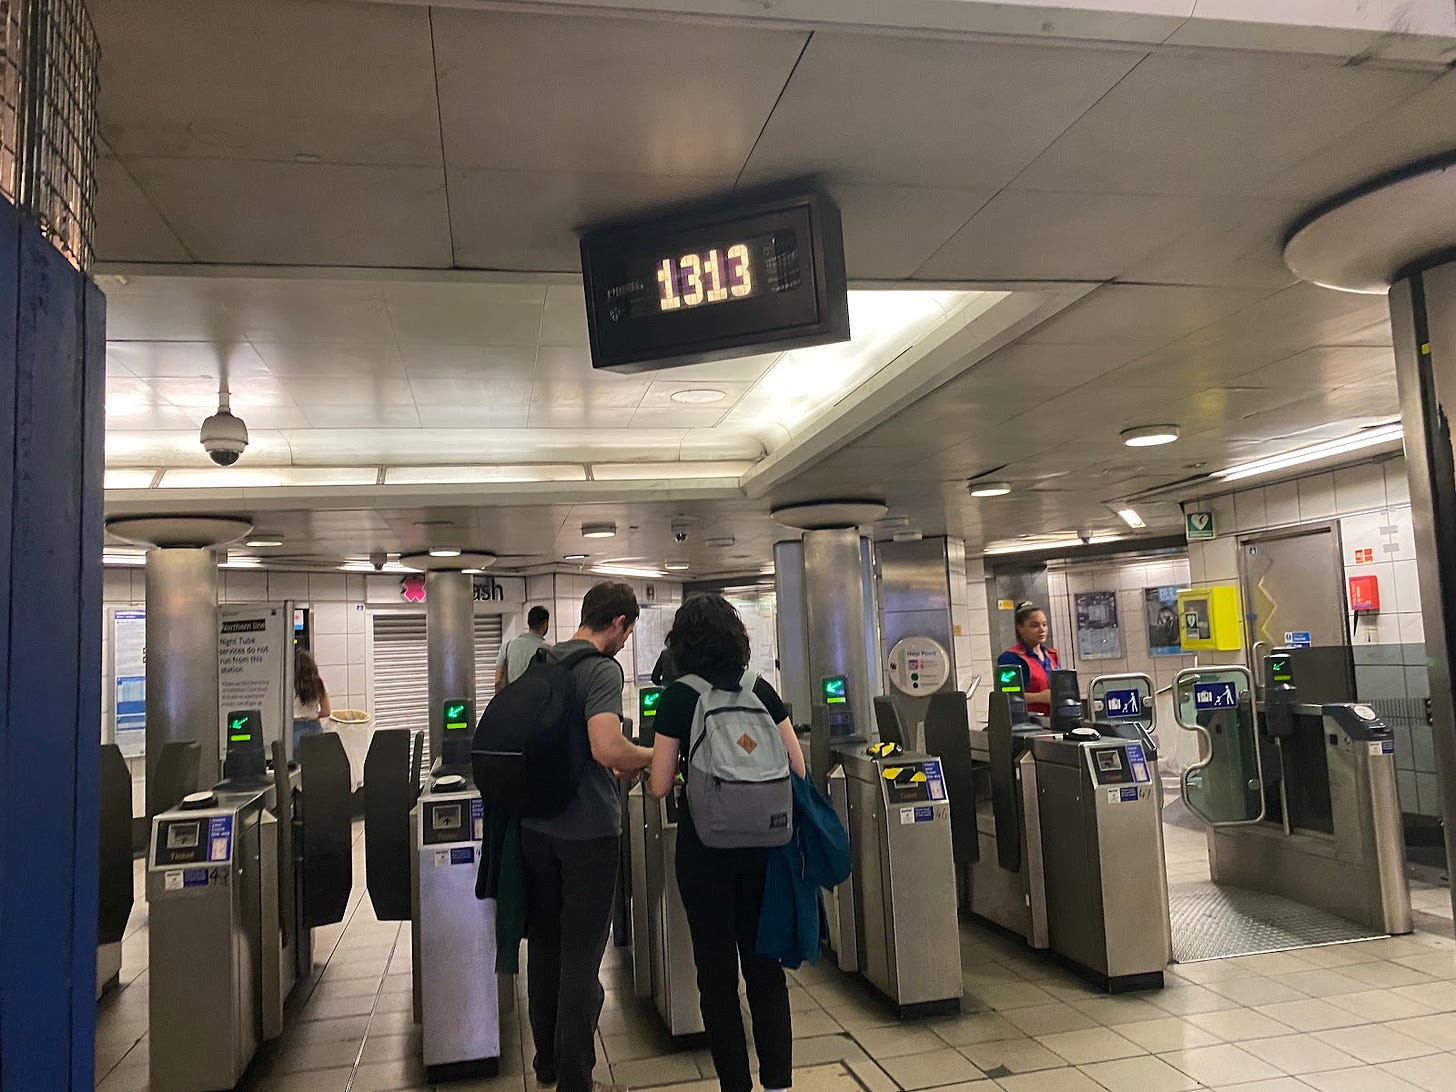 People going through a turnstile in the MTR. A clock reads 1313